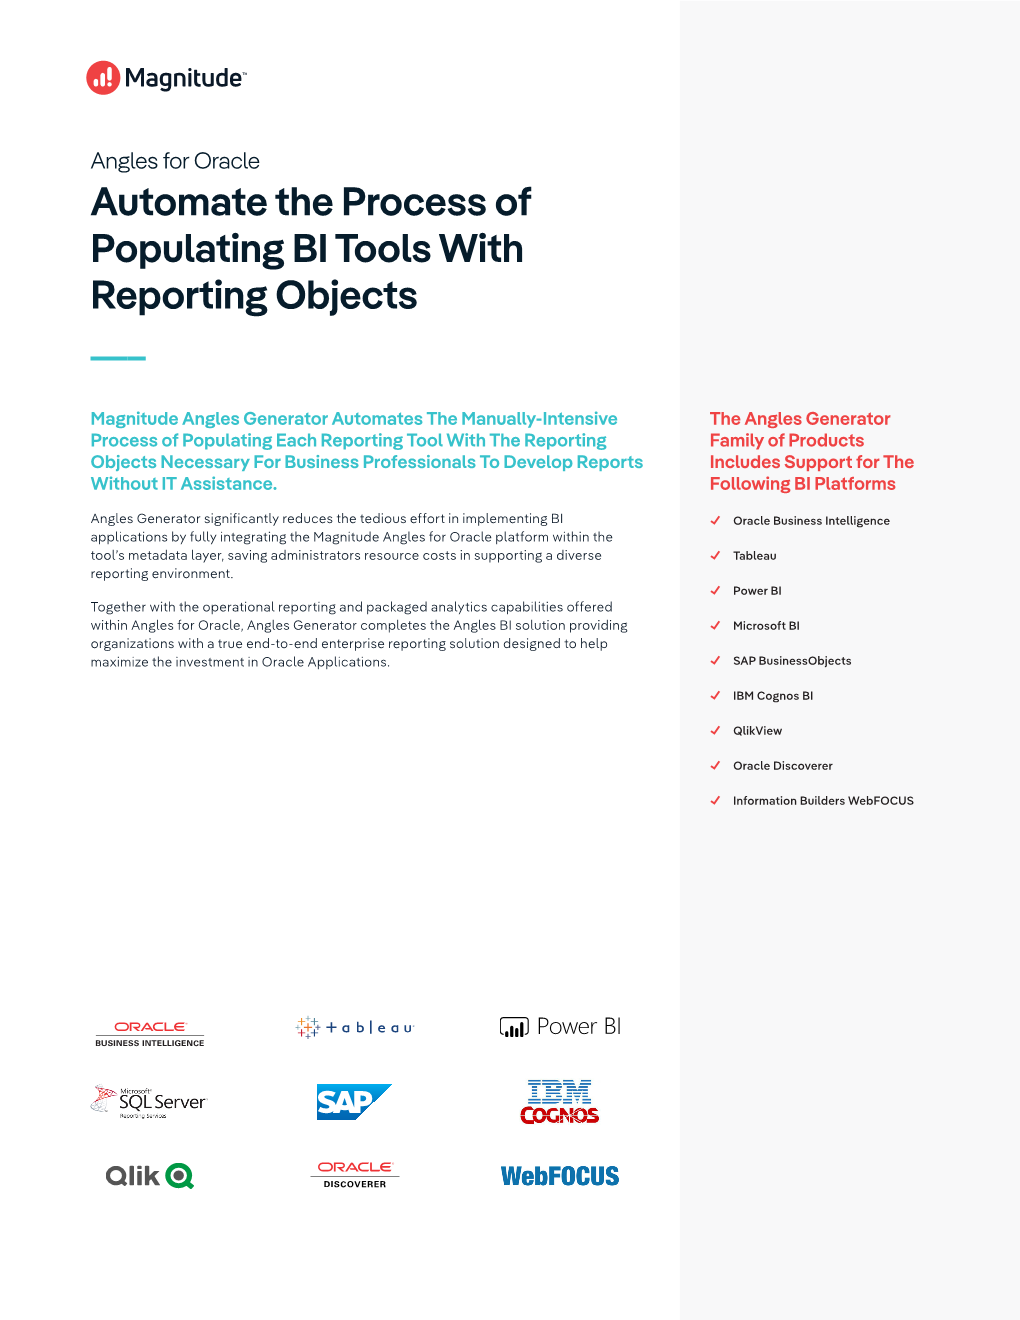 Automate the Process of Populating BI Tools with Reporting Objects ___